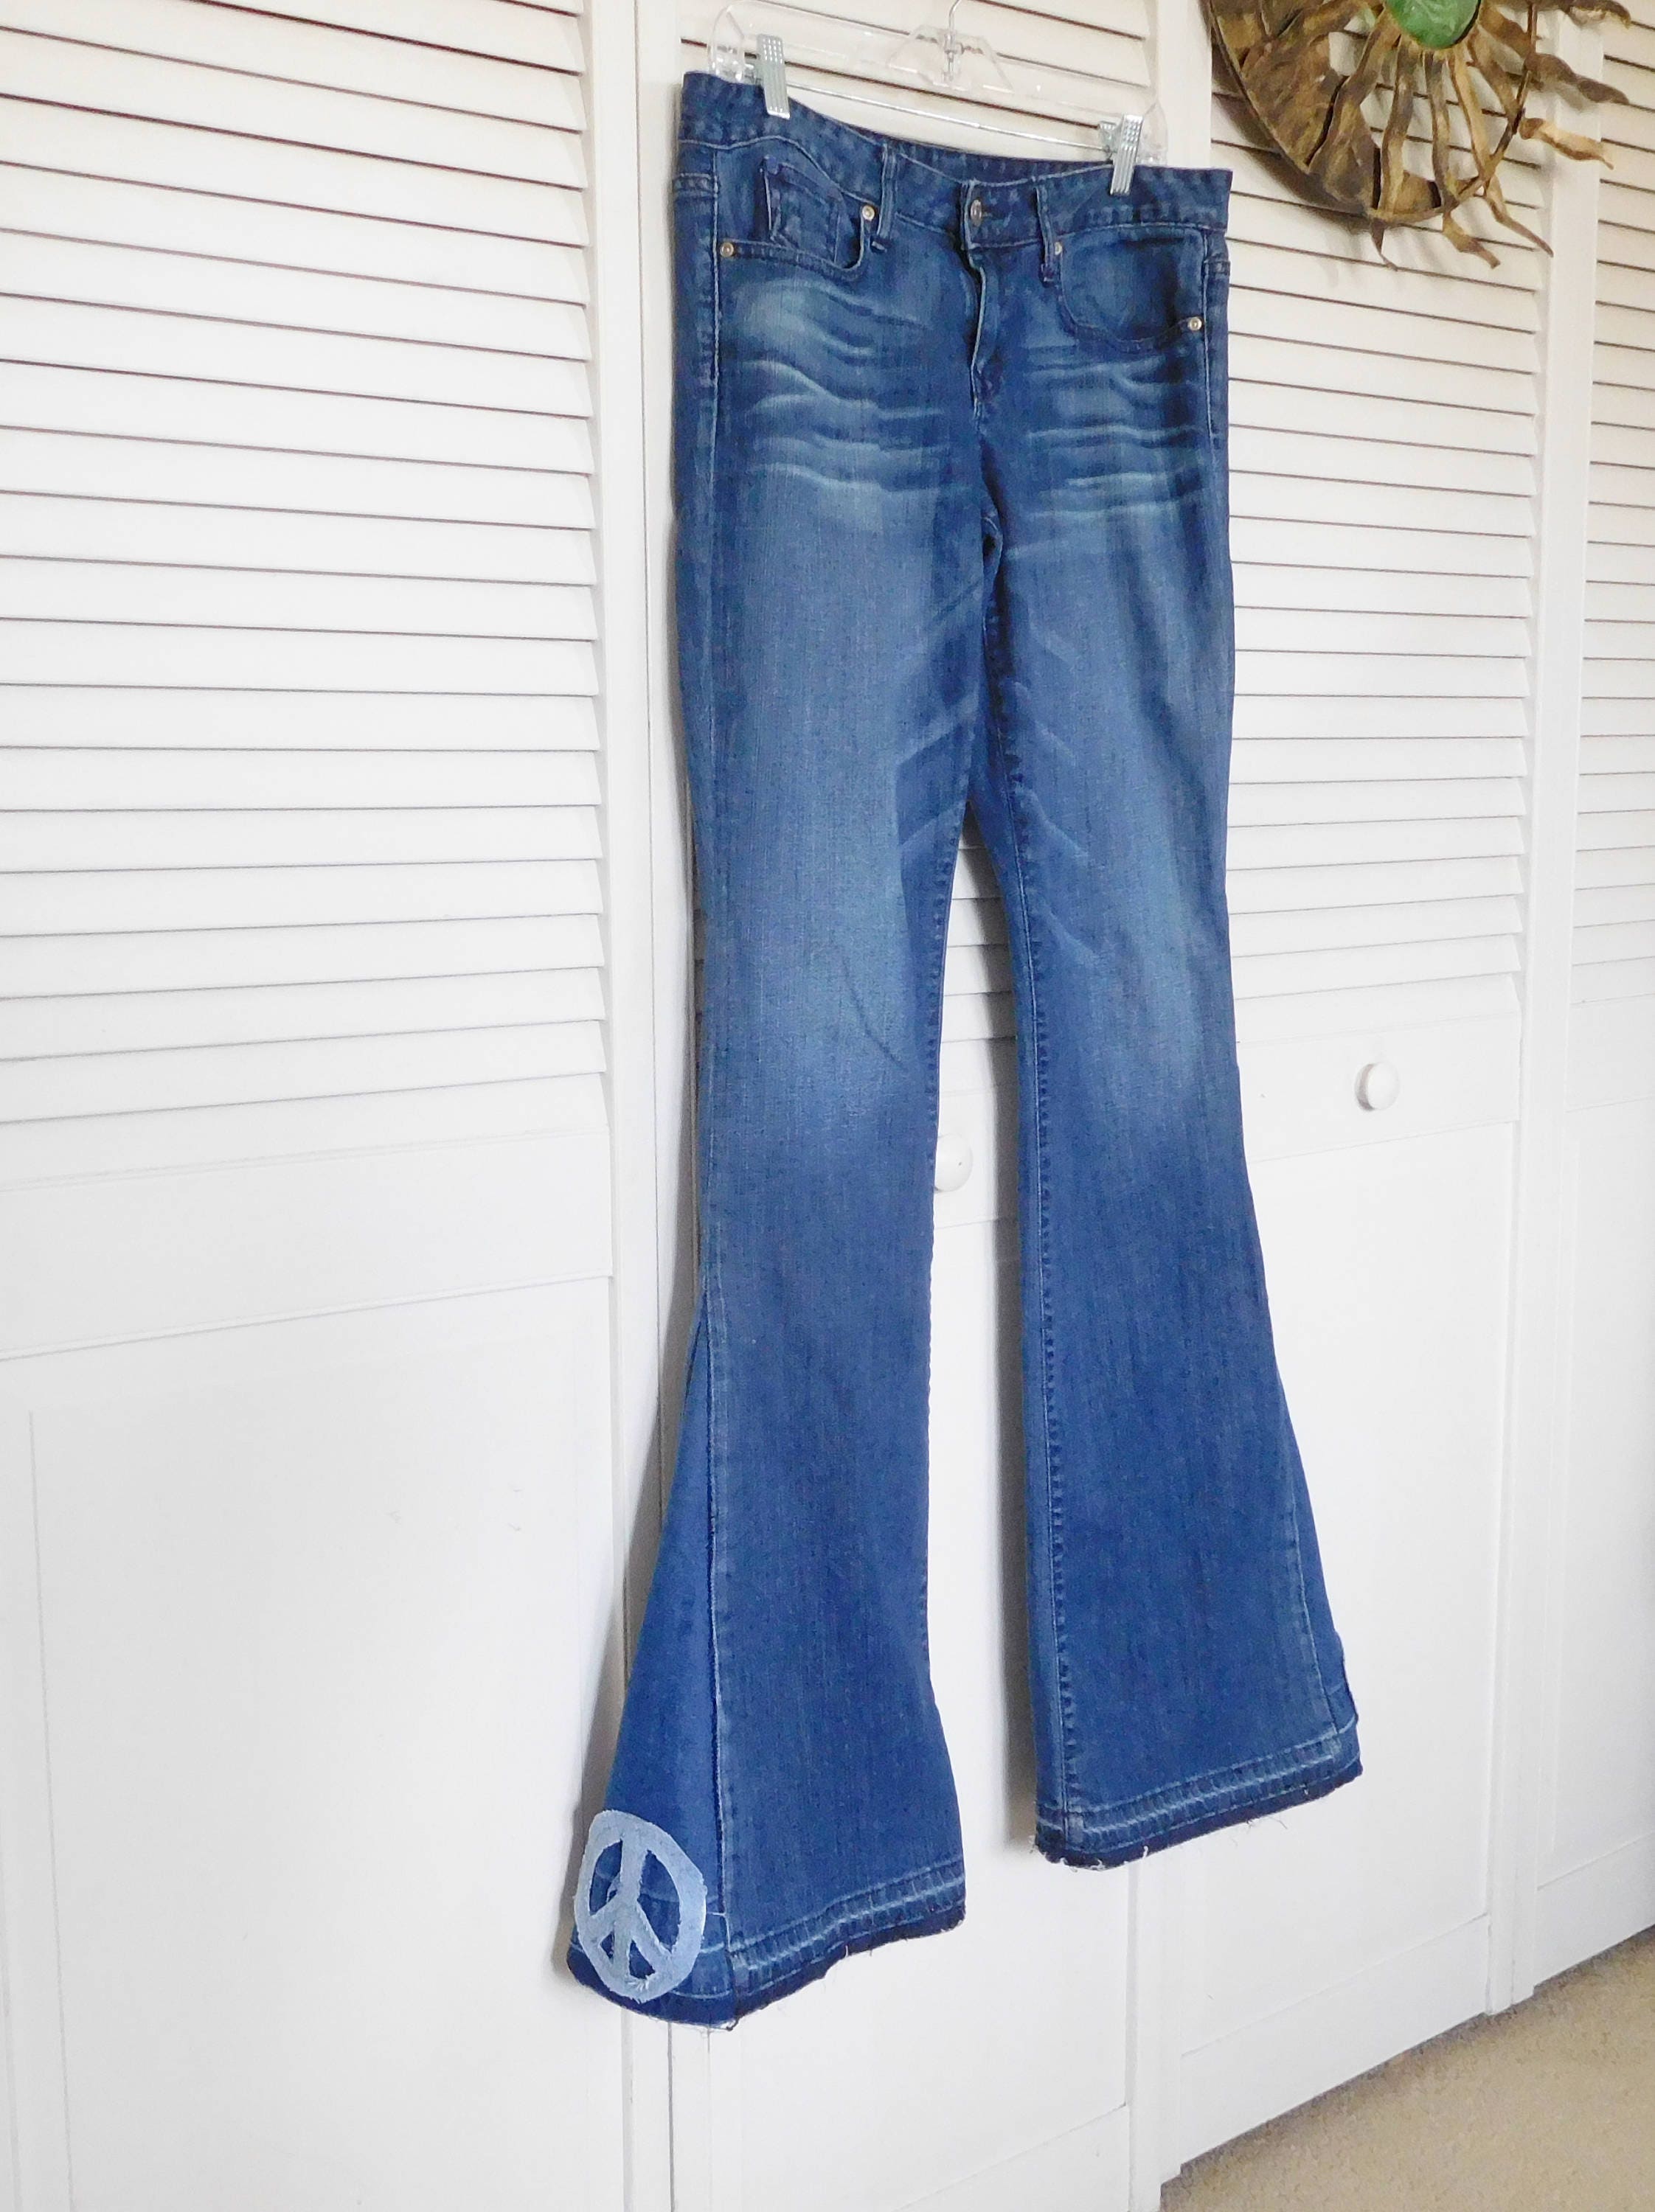 Bell Bottom Jeans hip hugger bellbottoms 35x37 with a 8 | Etsy